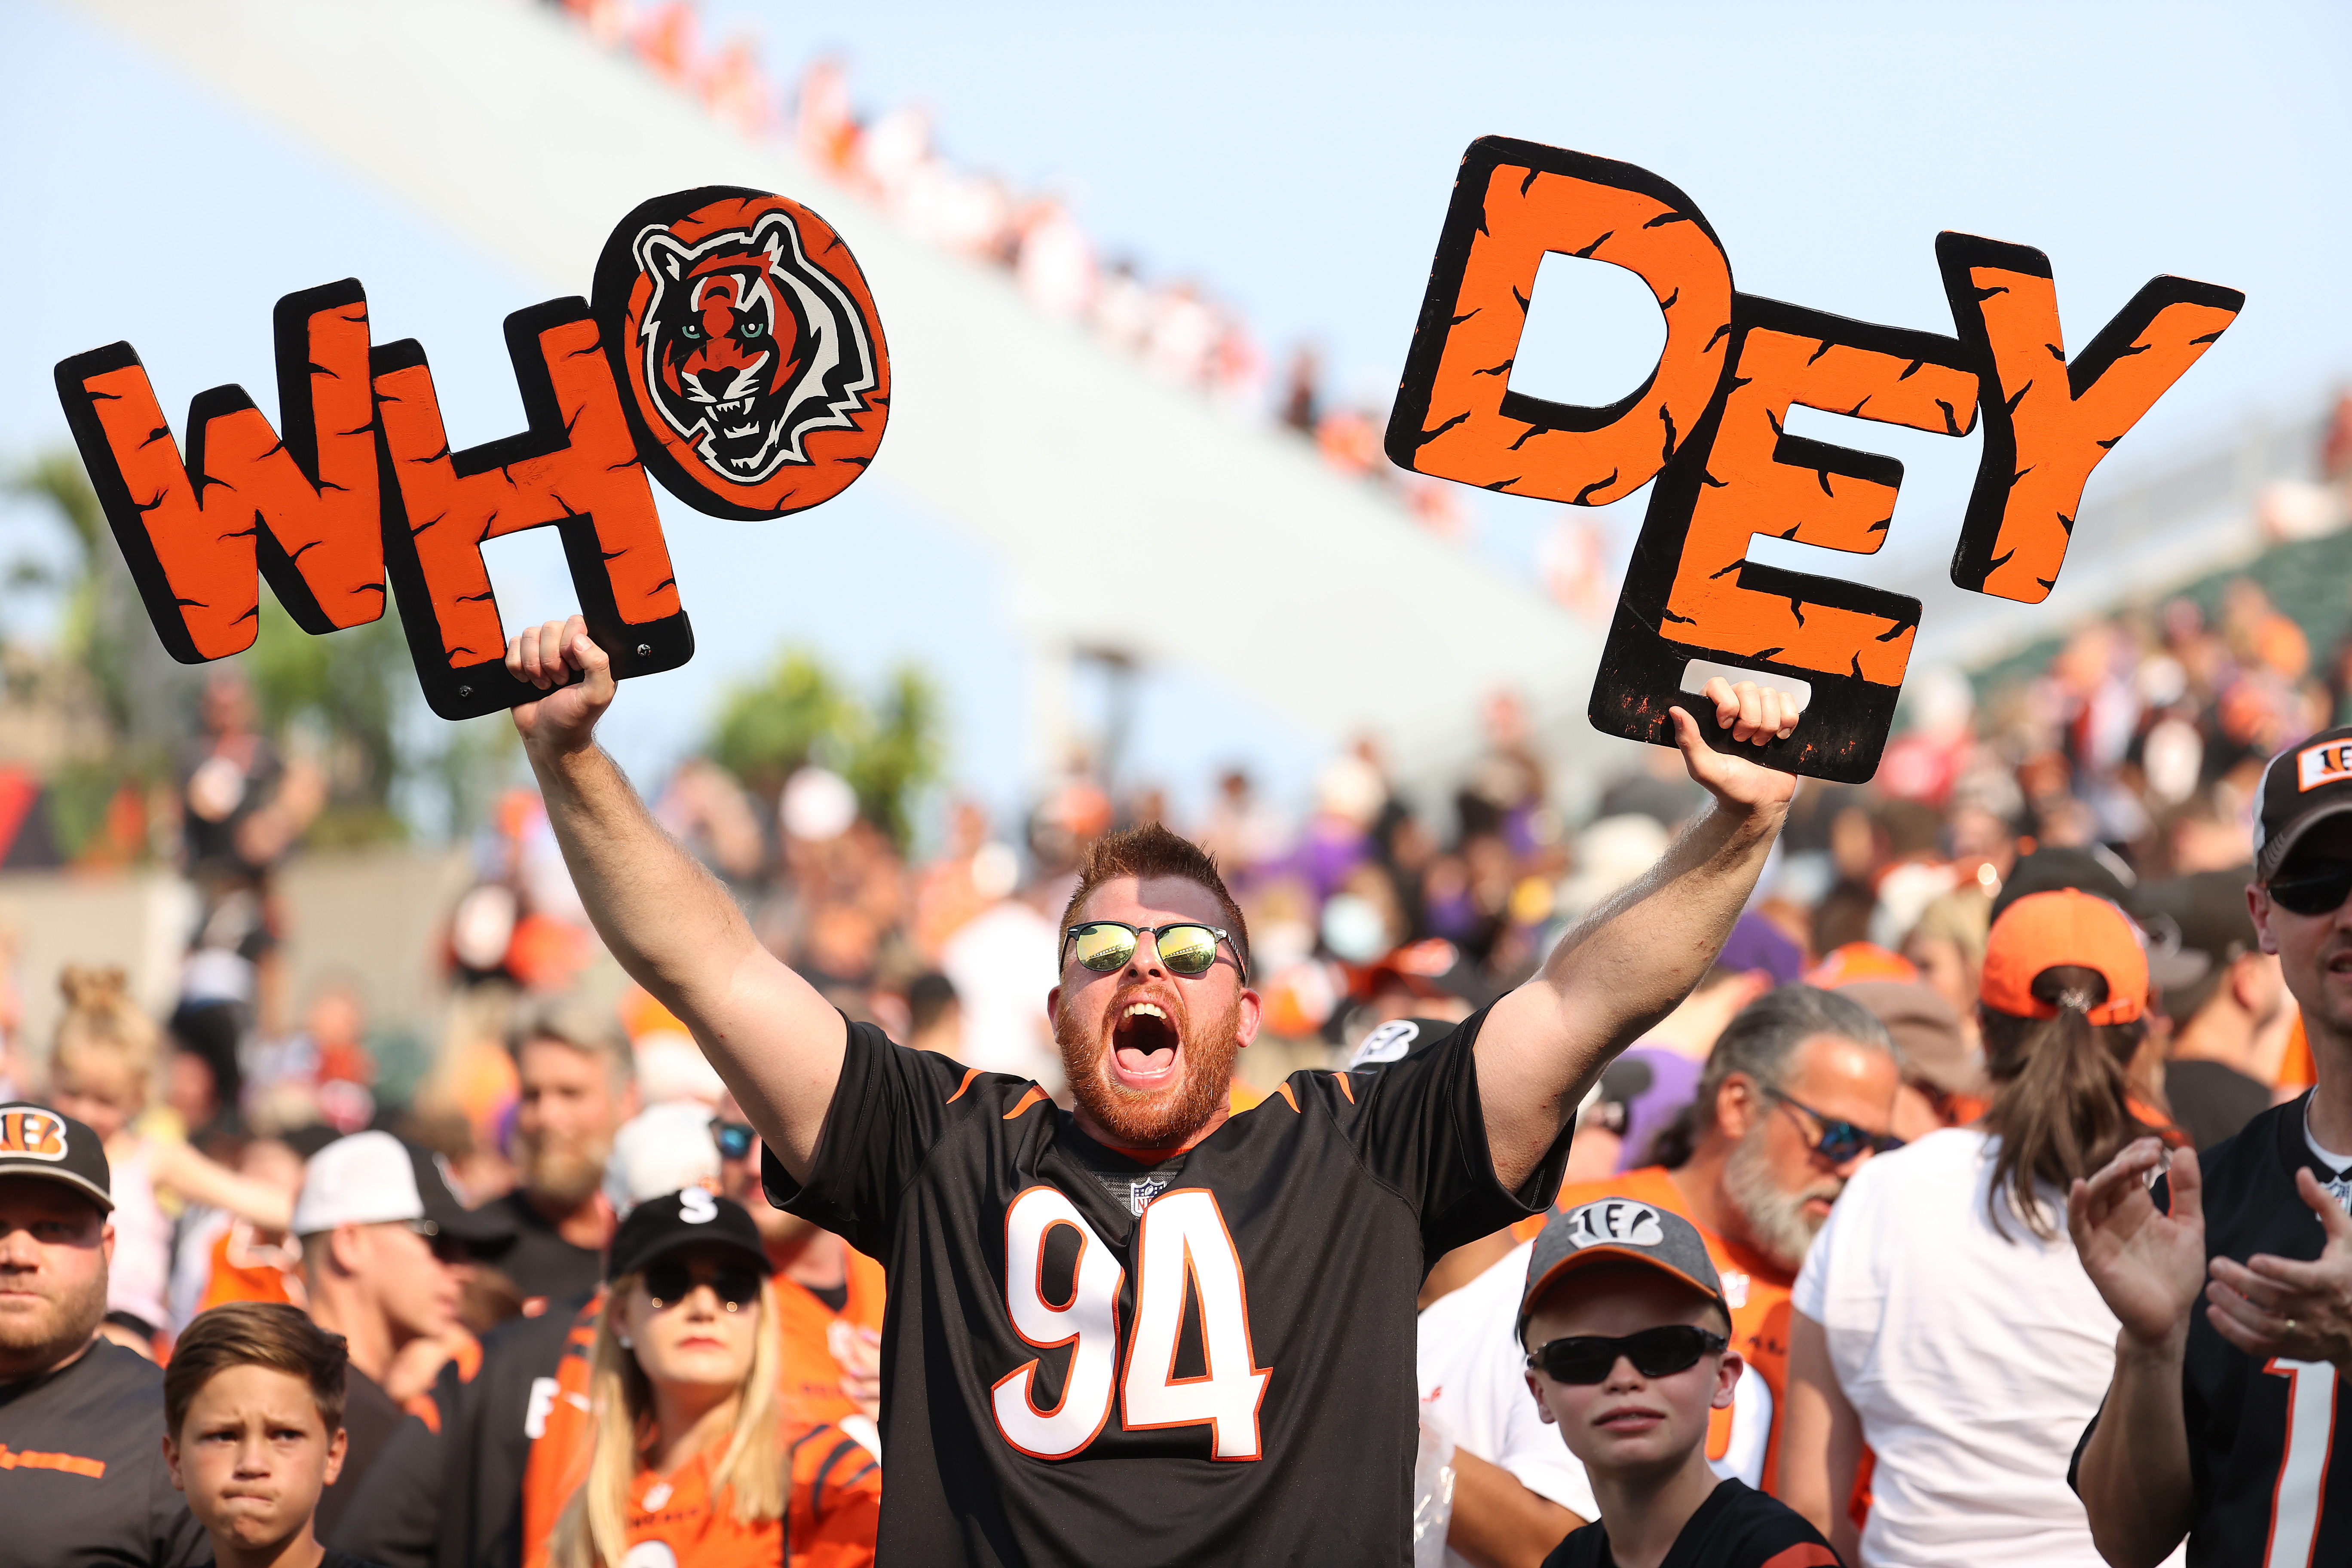 Bengals fans' 'prime spot' to tailgate